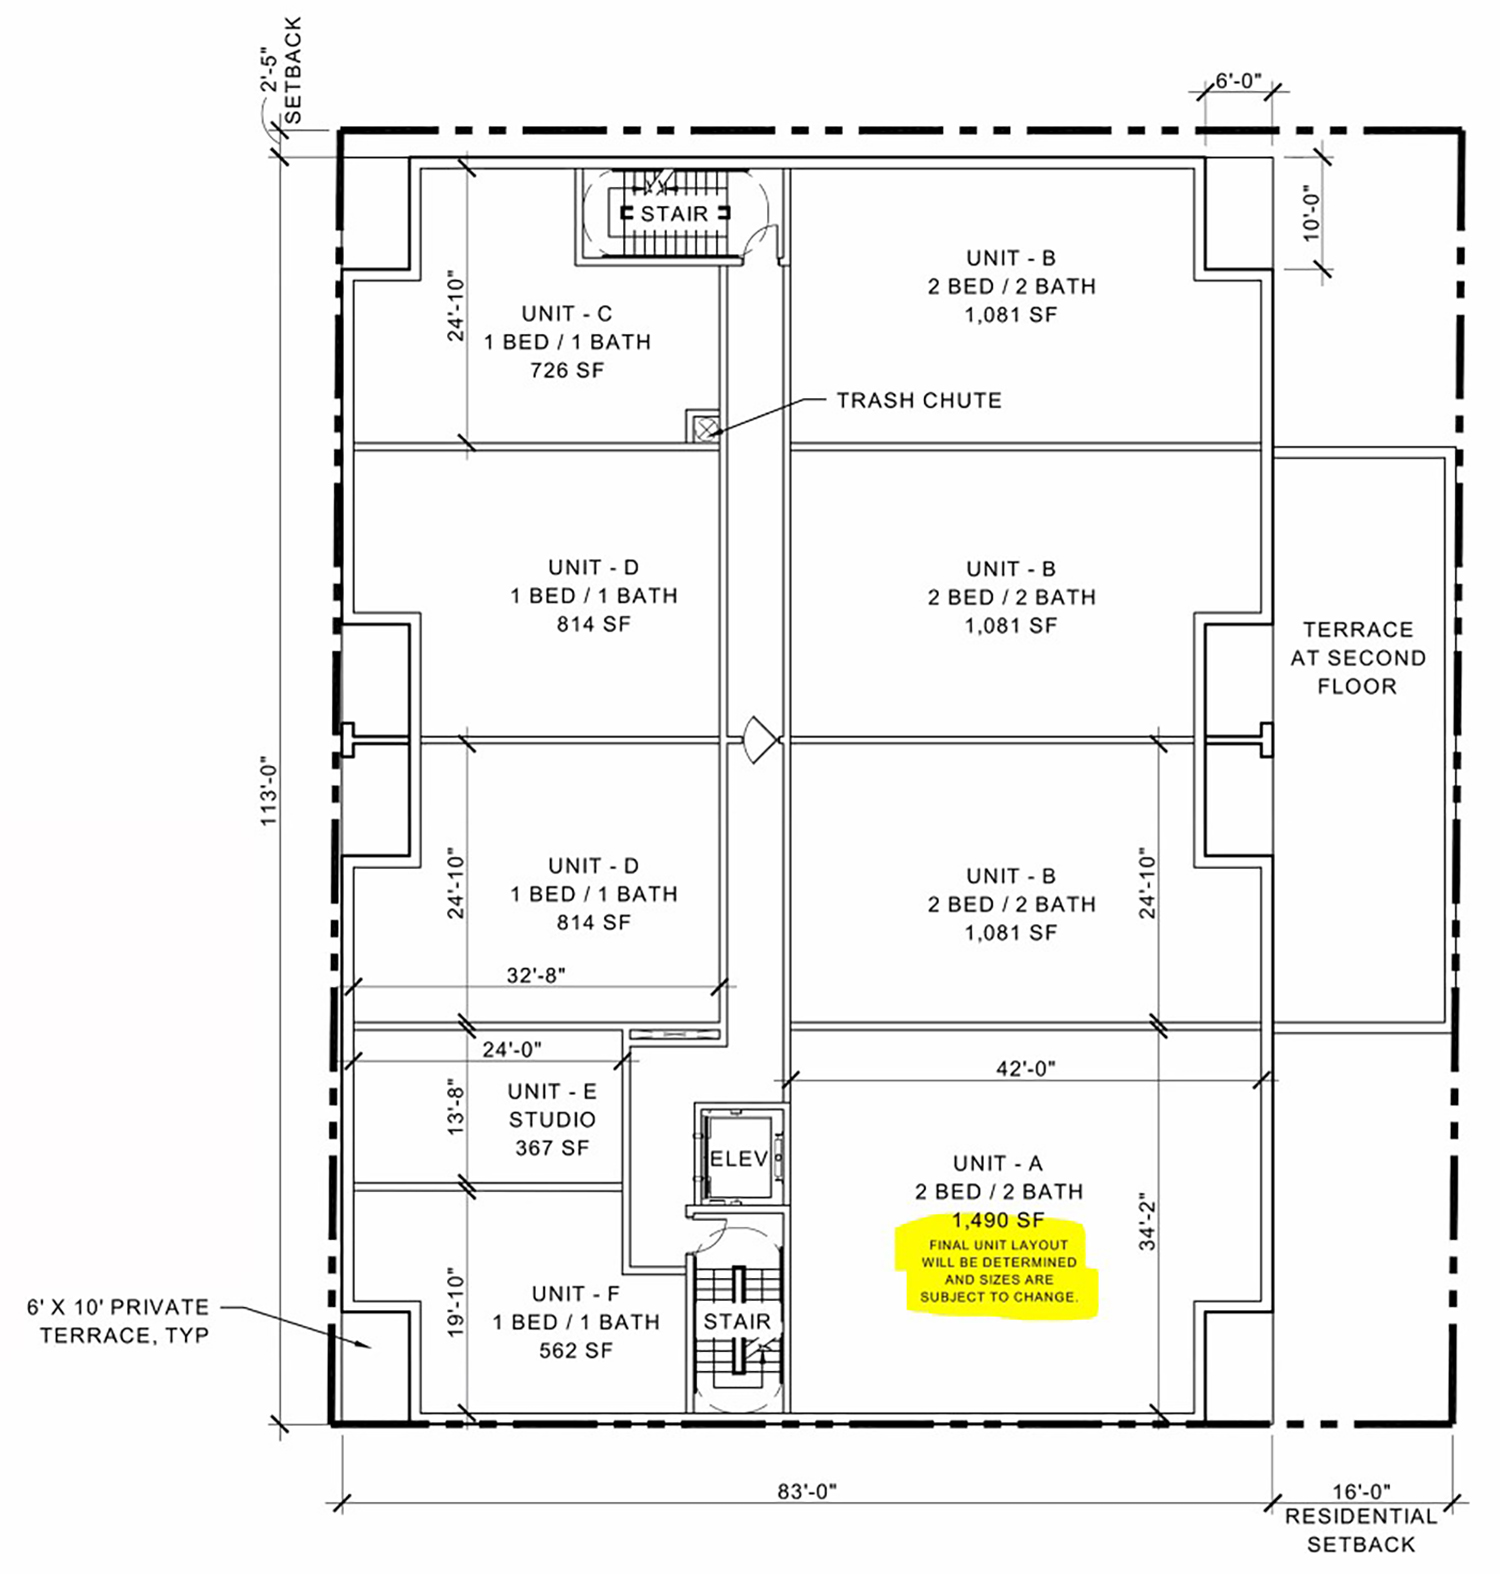 Typical Residential Floor Plan for 2250 W Irving Park Road. Drawing by Sullivan, Goulette, and Wilson Architects